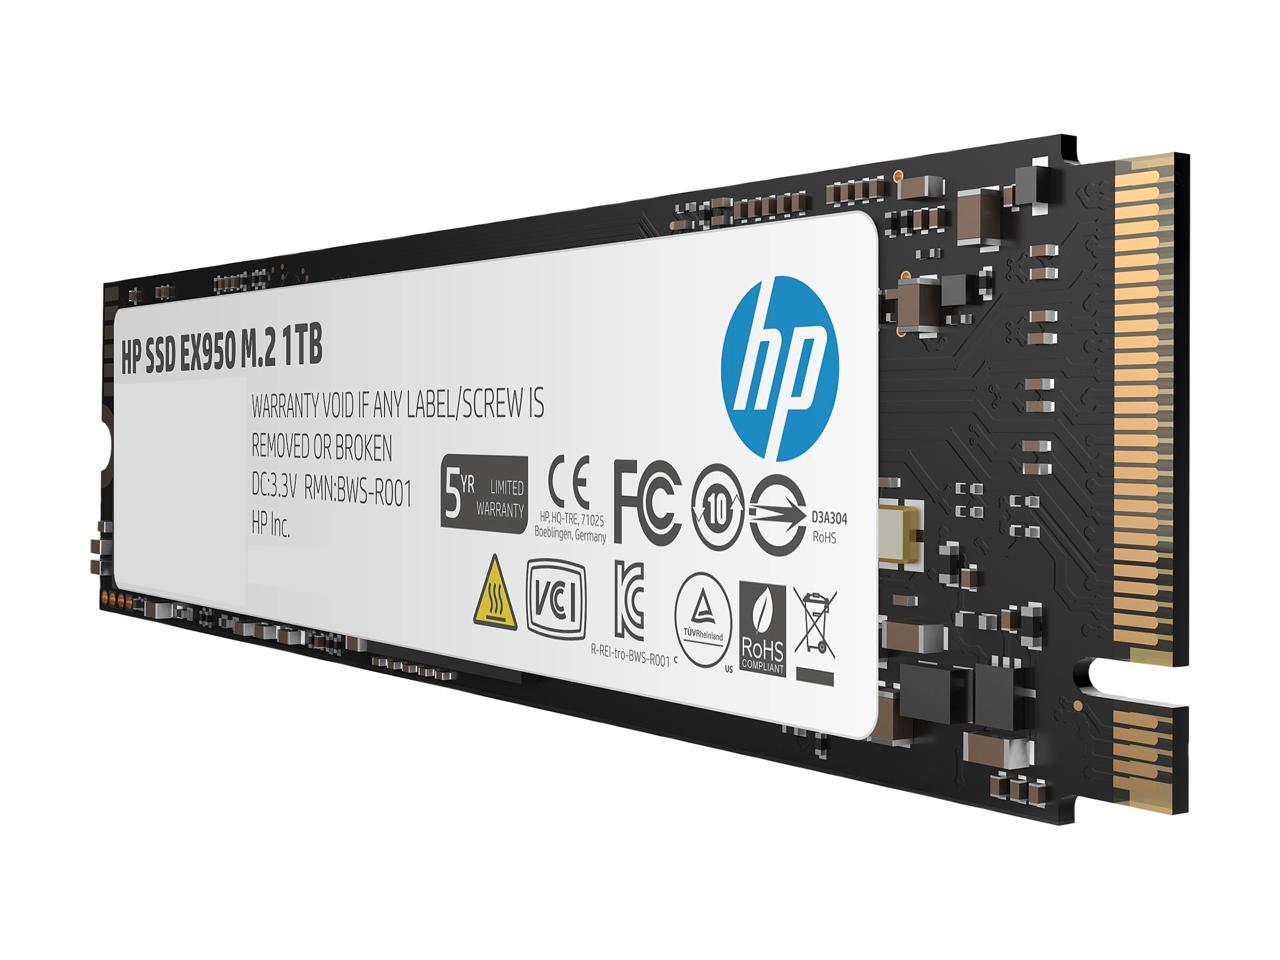 HP EX950 M.2 2280 1TB PCle Gen3 x4, NVMe1.3 3D NAND Internal Solid State Drive (SSD) 5MS23AA#ABC